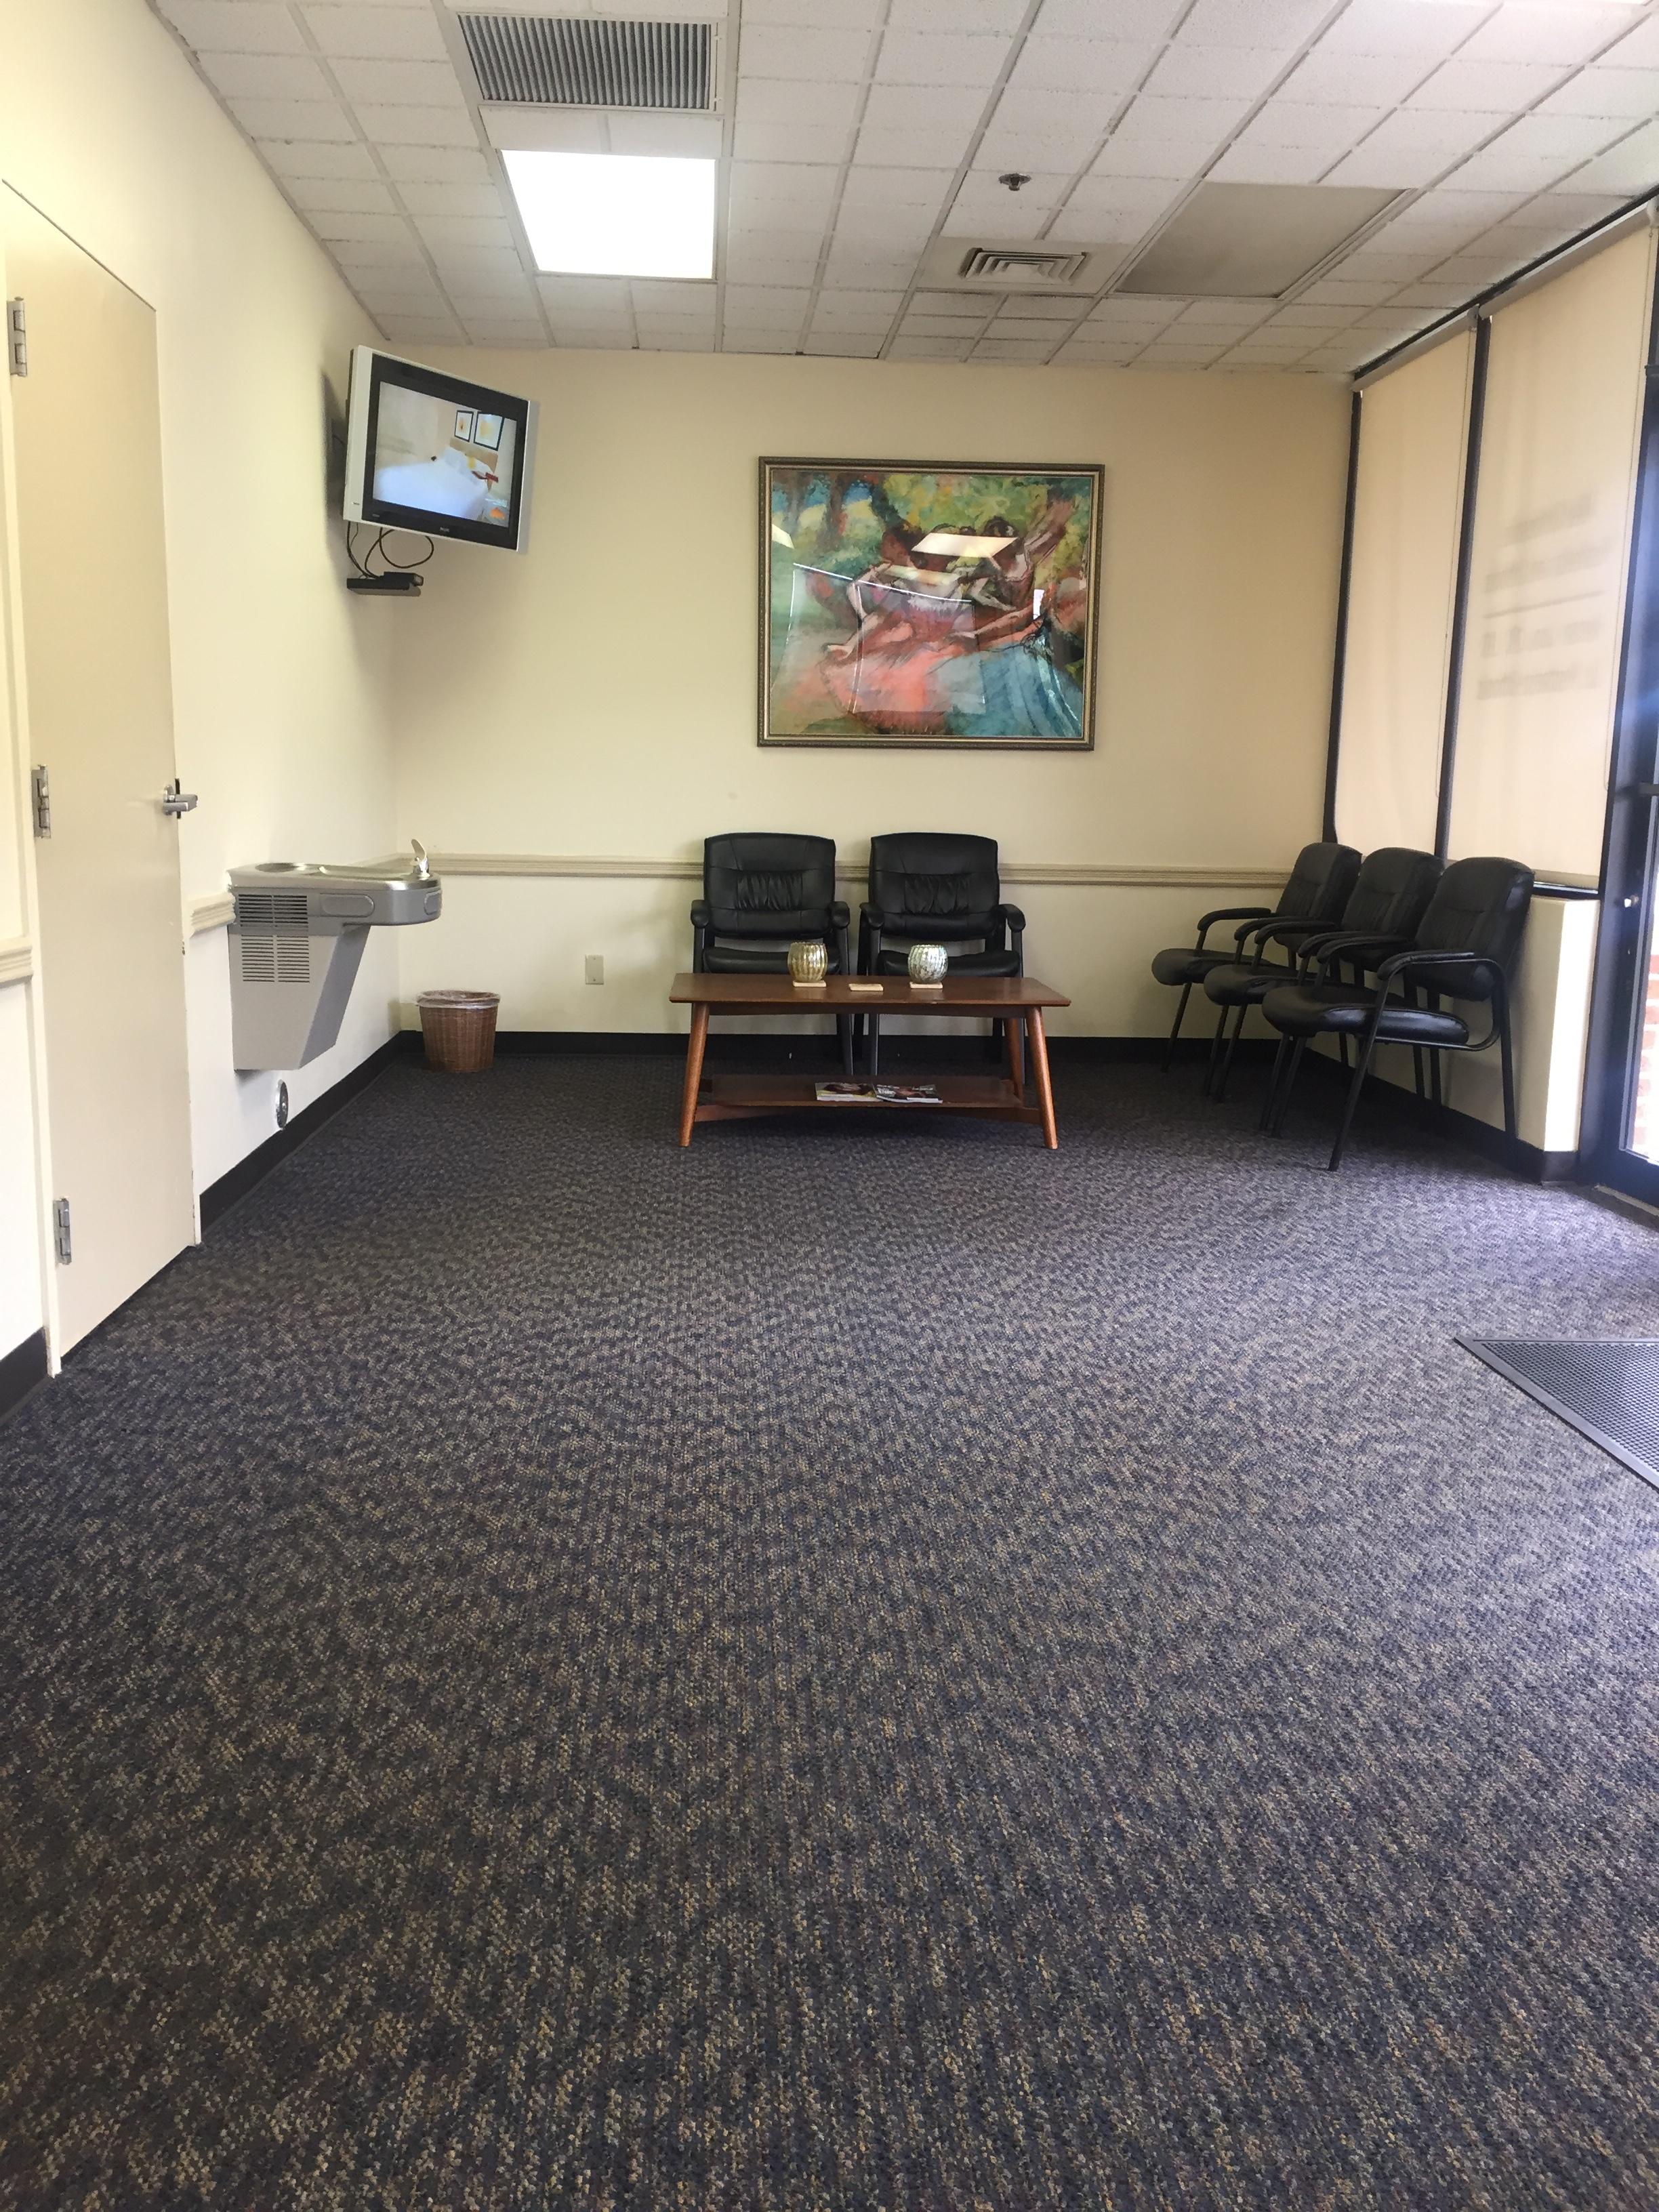 The Non-Surgical Center for Physical & Sports Medicine Photo